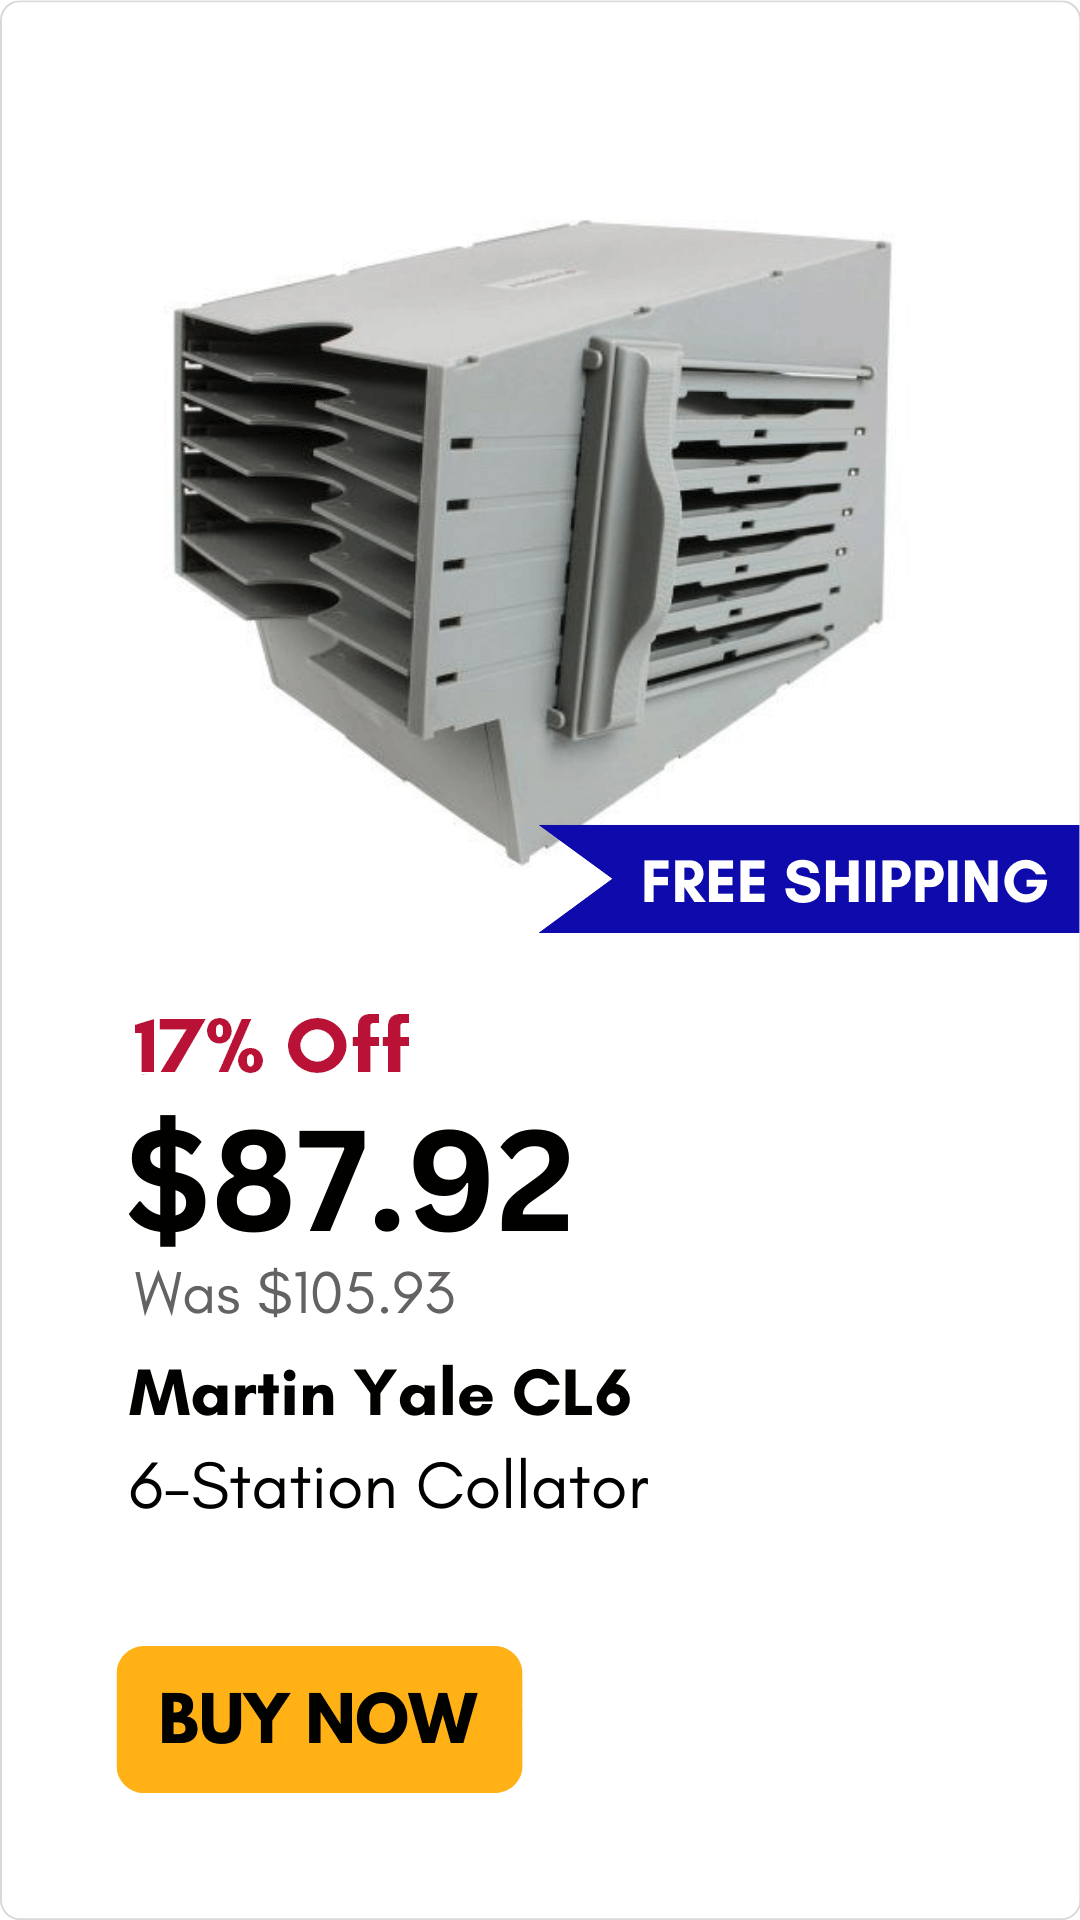 Martin Yale CL6 6-Station Collator on sale for 18% off and free shipping!